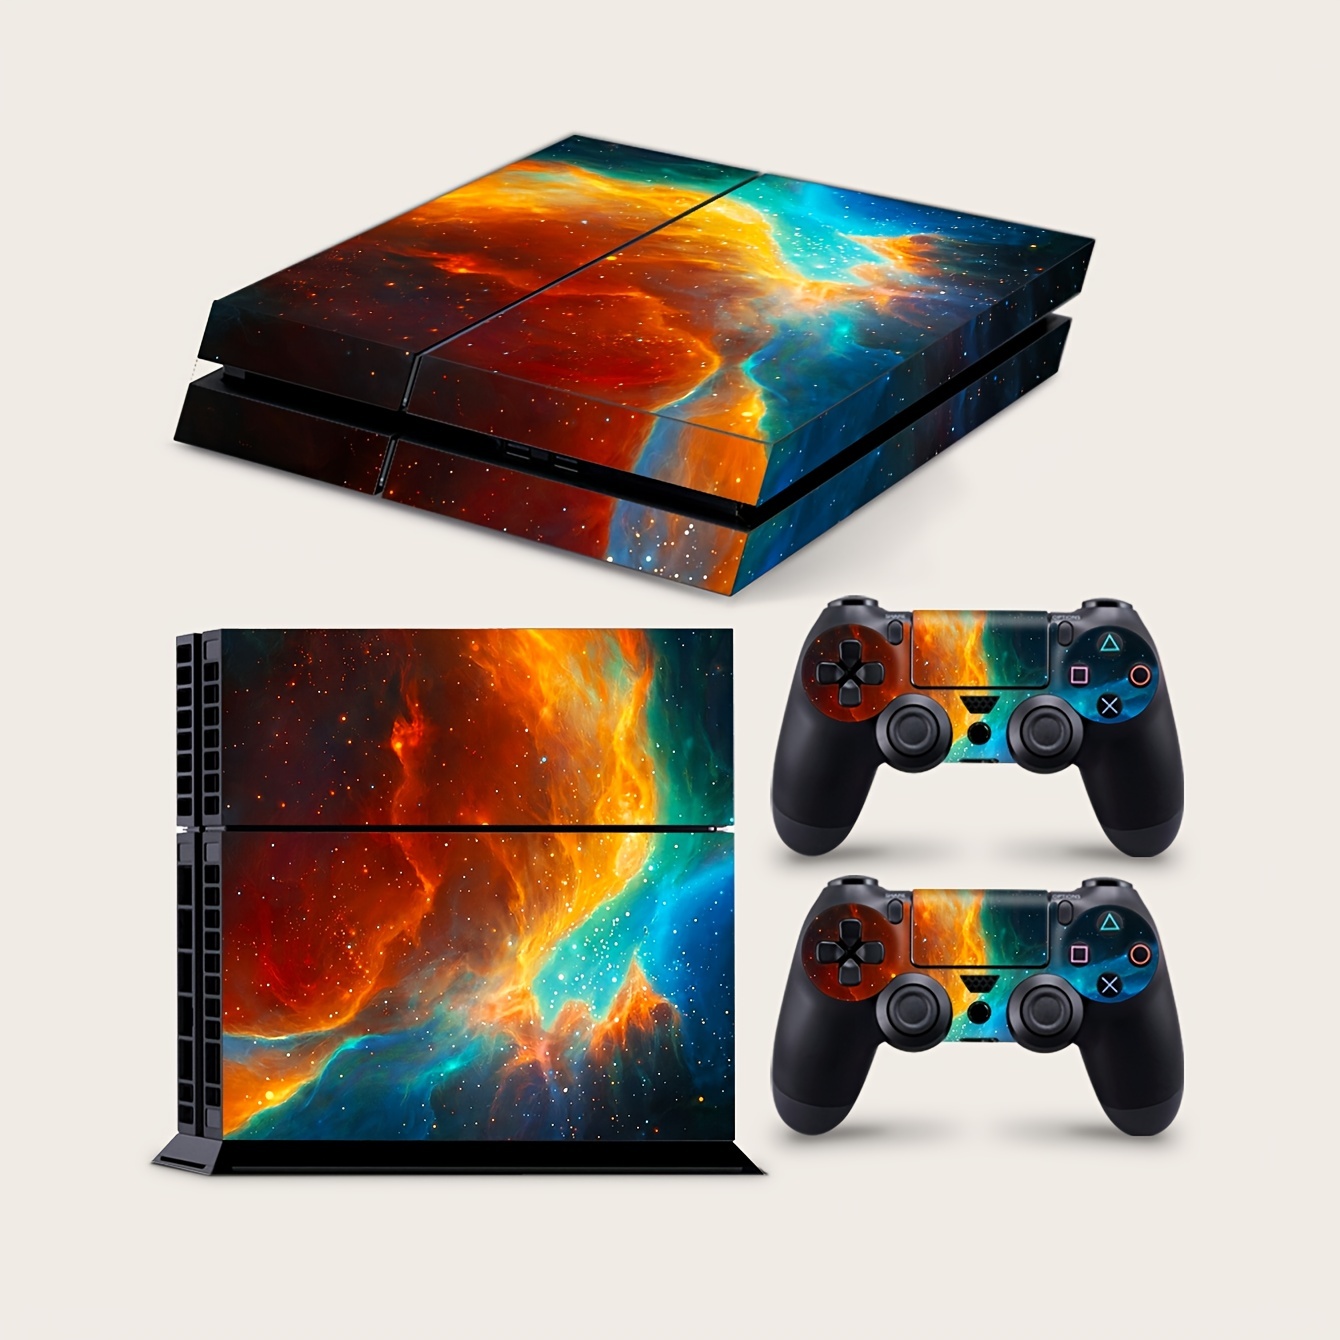  PS5 Skin for Console and Controller, Vinyl Sticker Decal Cover  for Playstation 5, Whole Body Skin Protector Durable, Scratch Resistant,  Compatible with Playstation 5 Disk Edition, Dark Ninja : Video Games